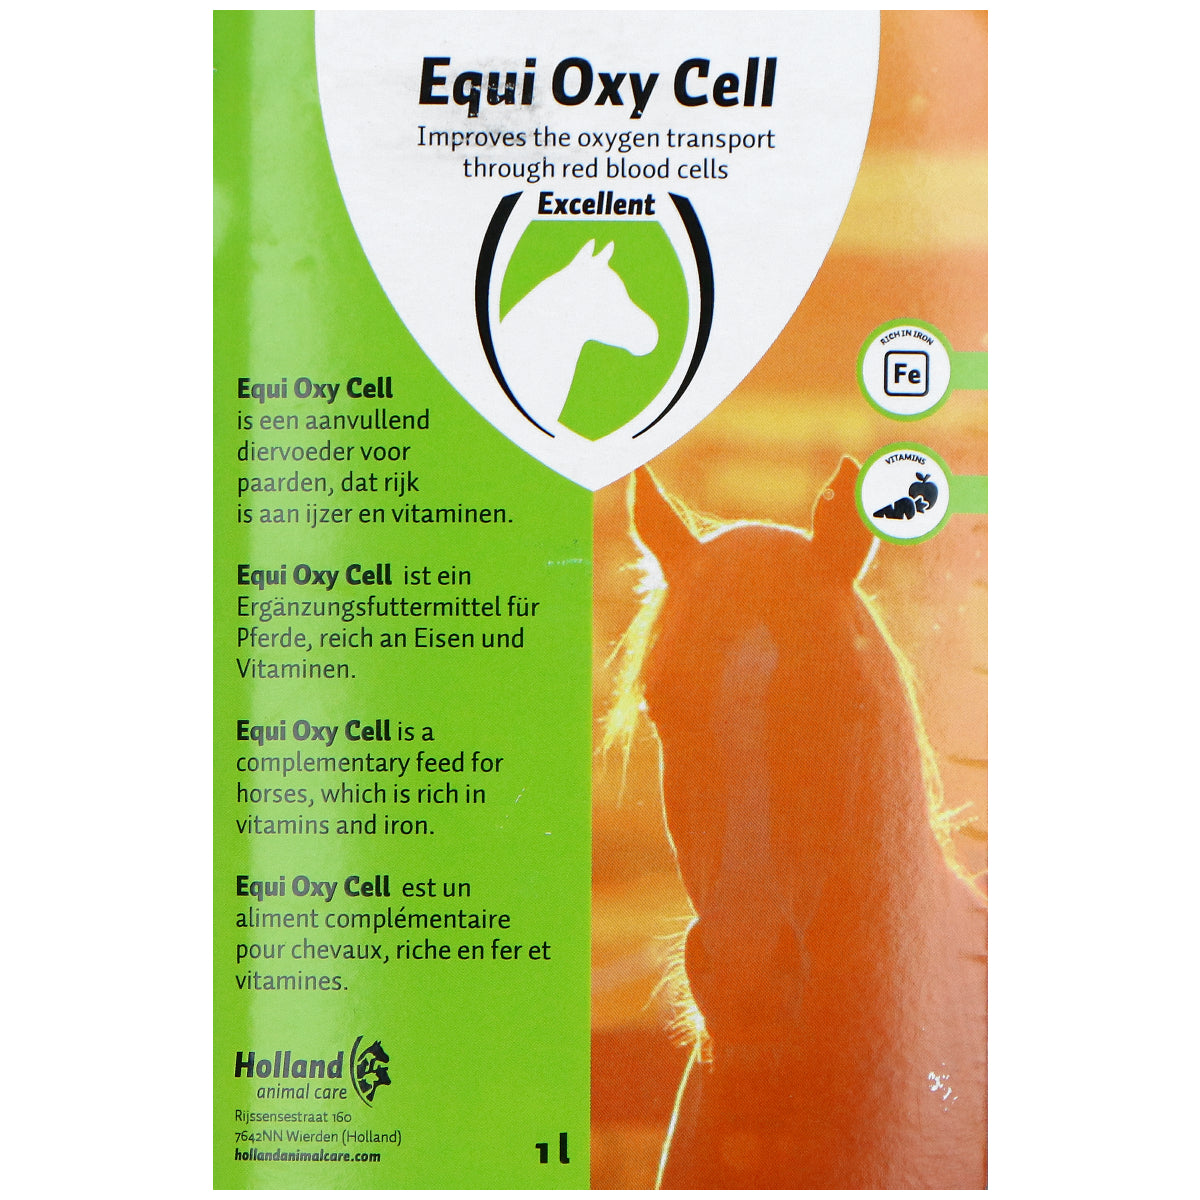 Excellent Equi Oxy Cell